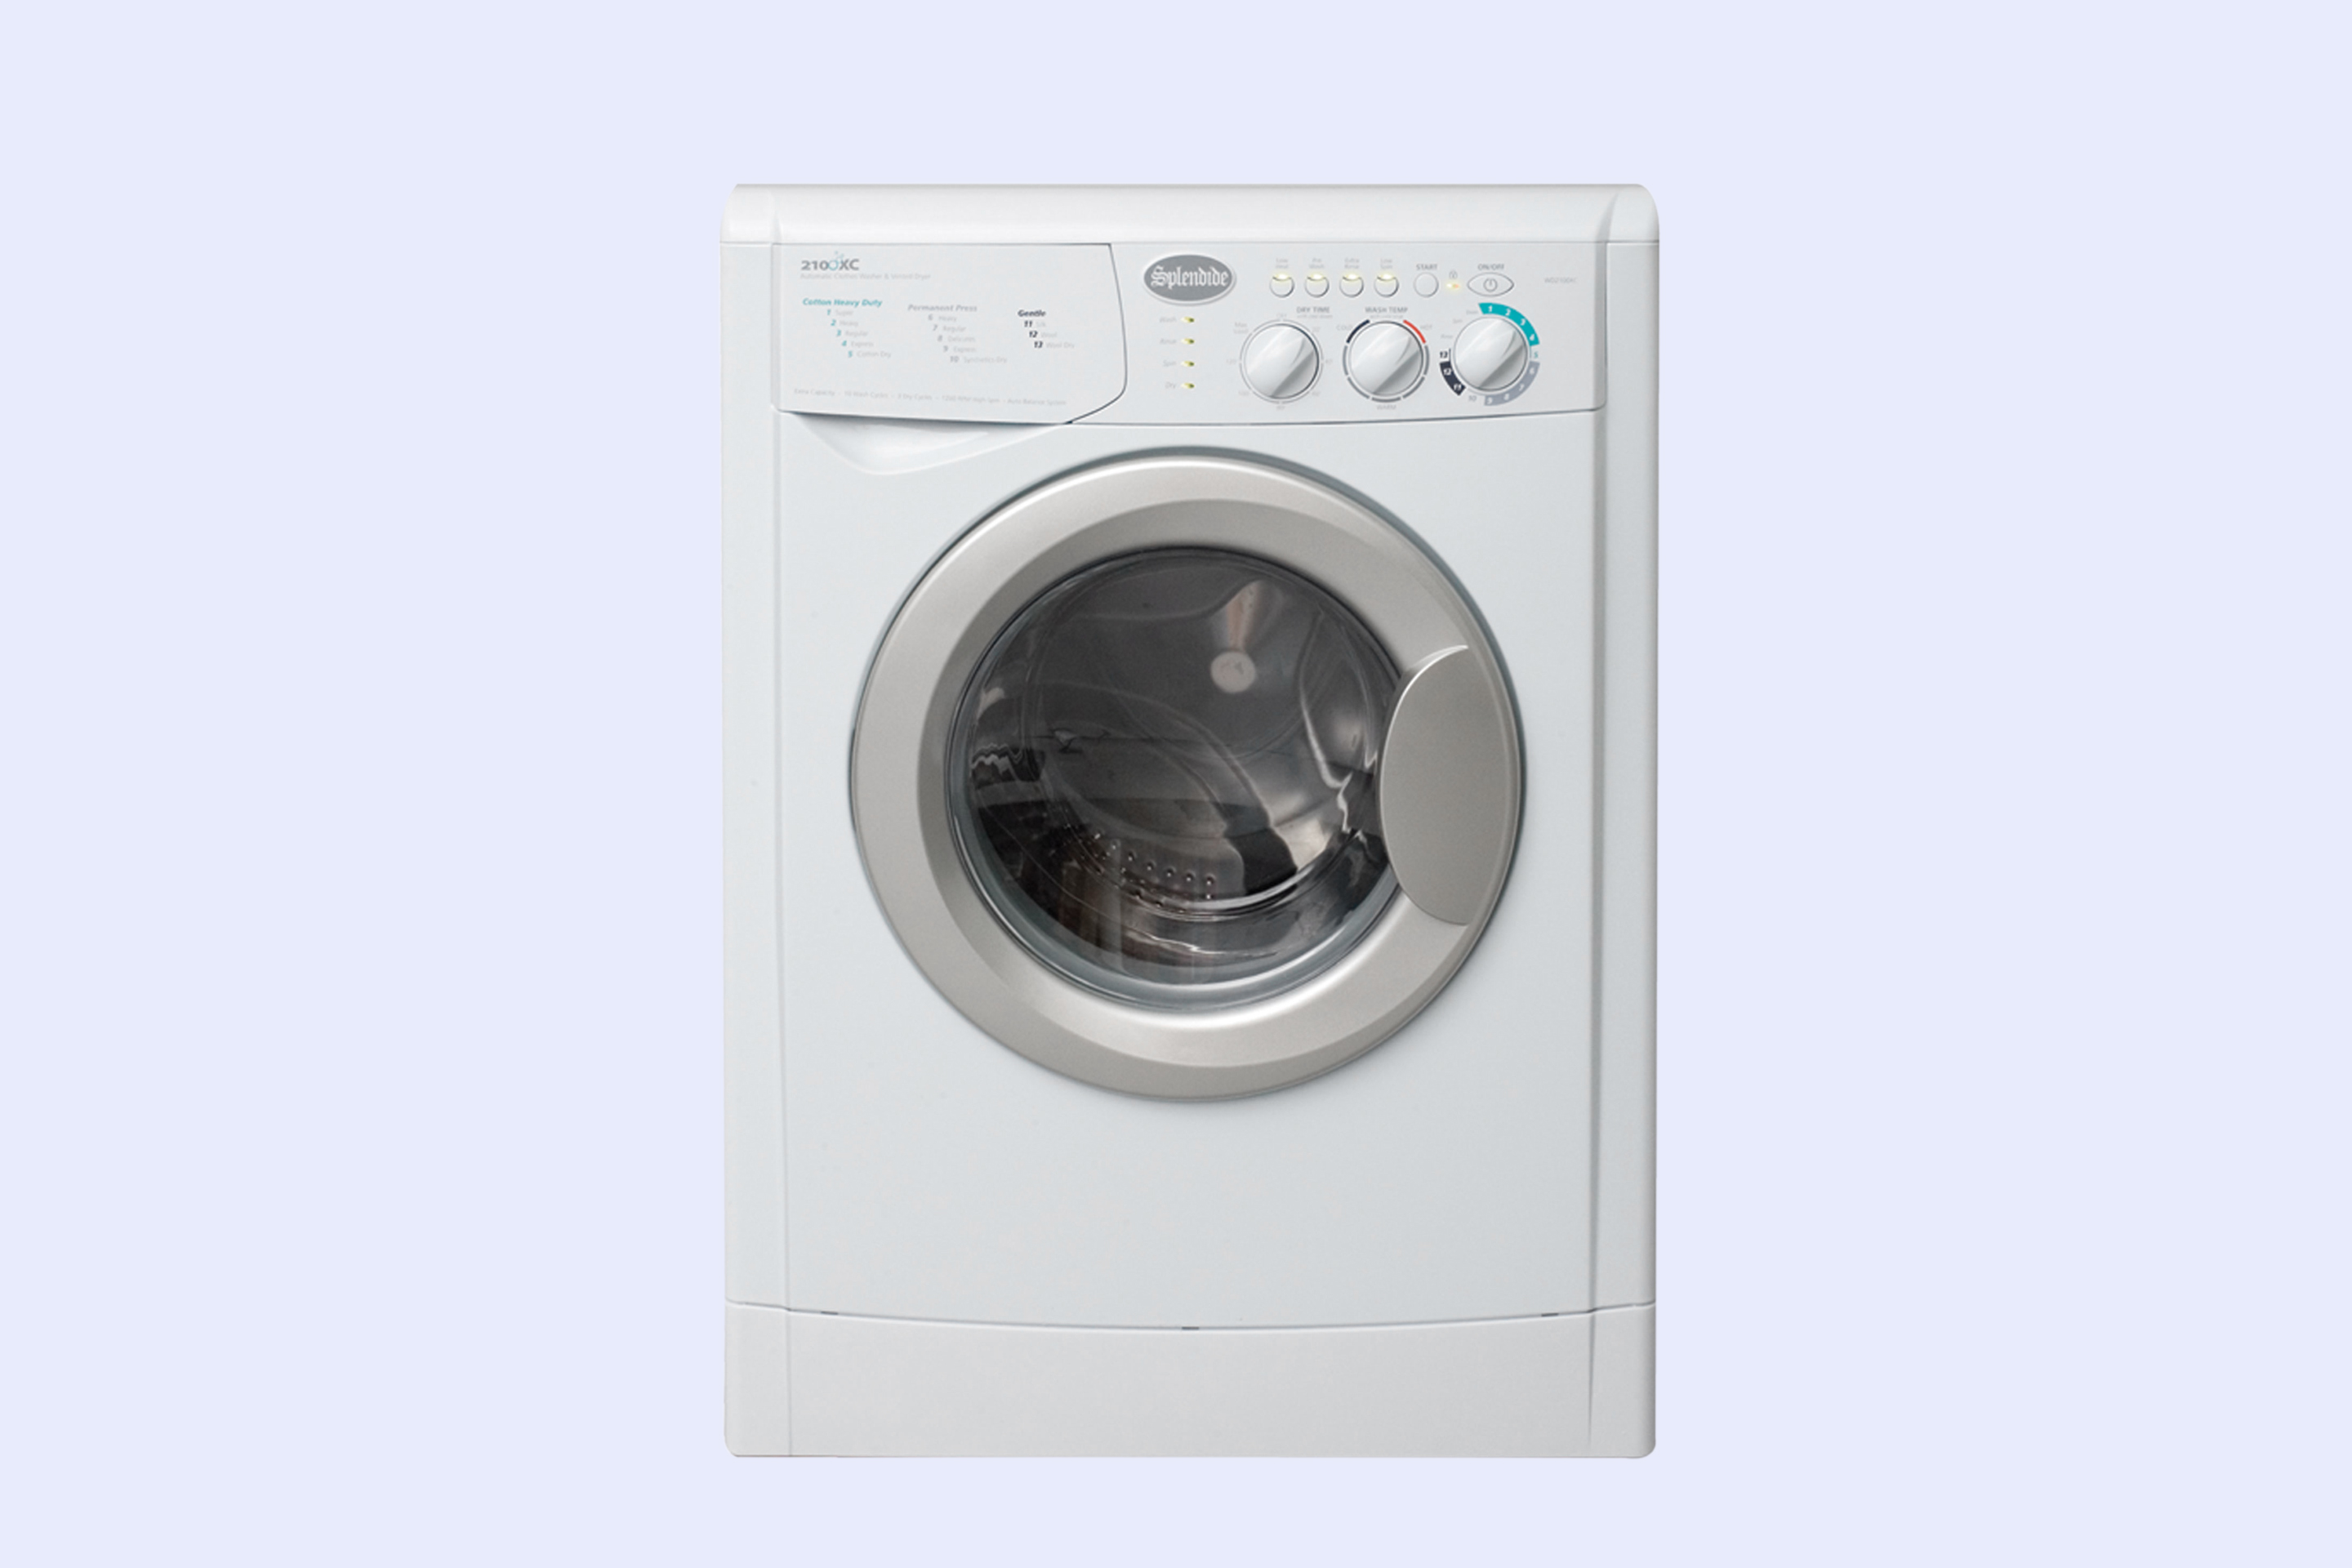 Best Washer And Dryer Updated September 2020 Money,How To Cook Carrots